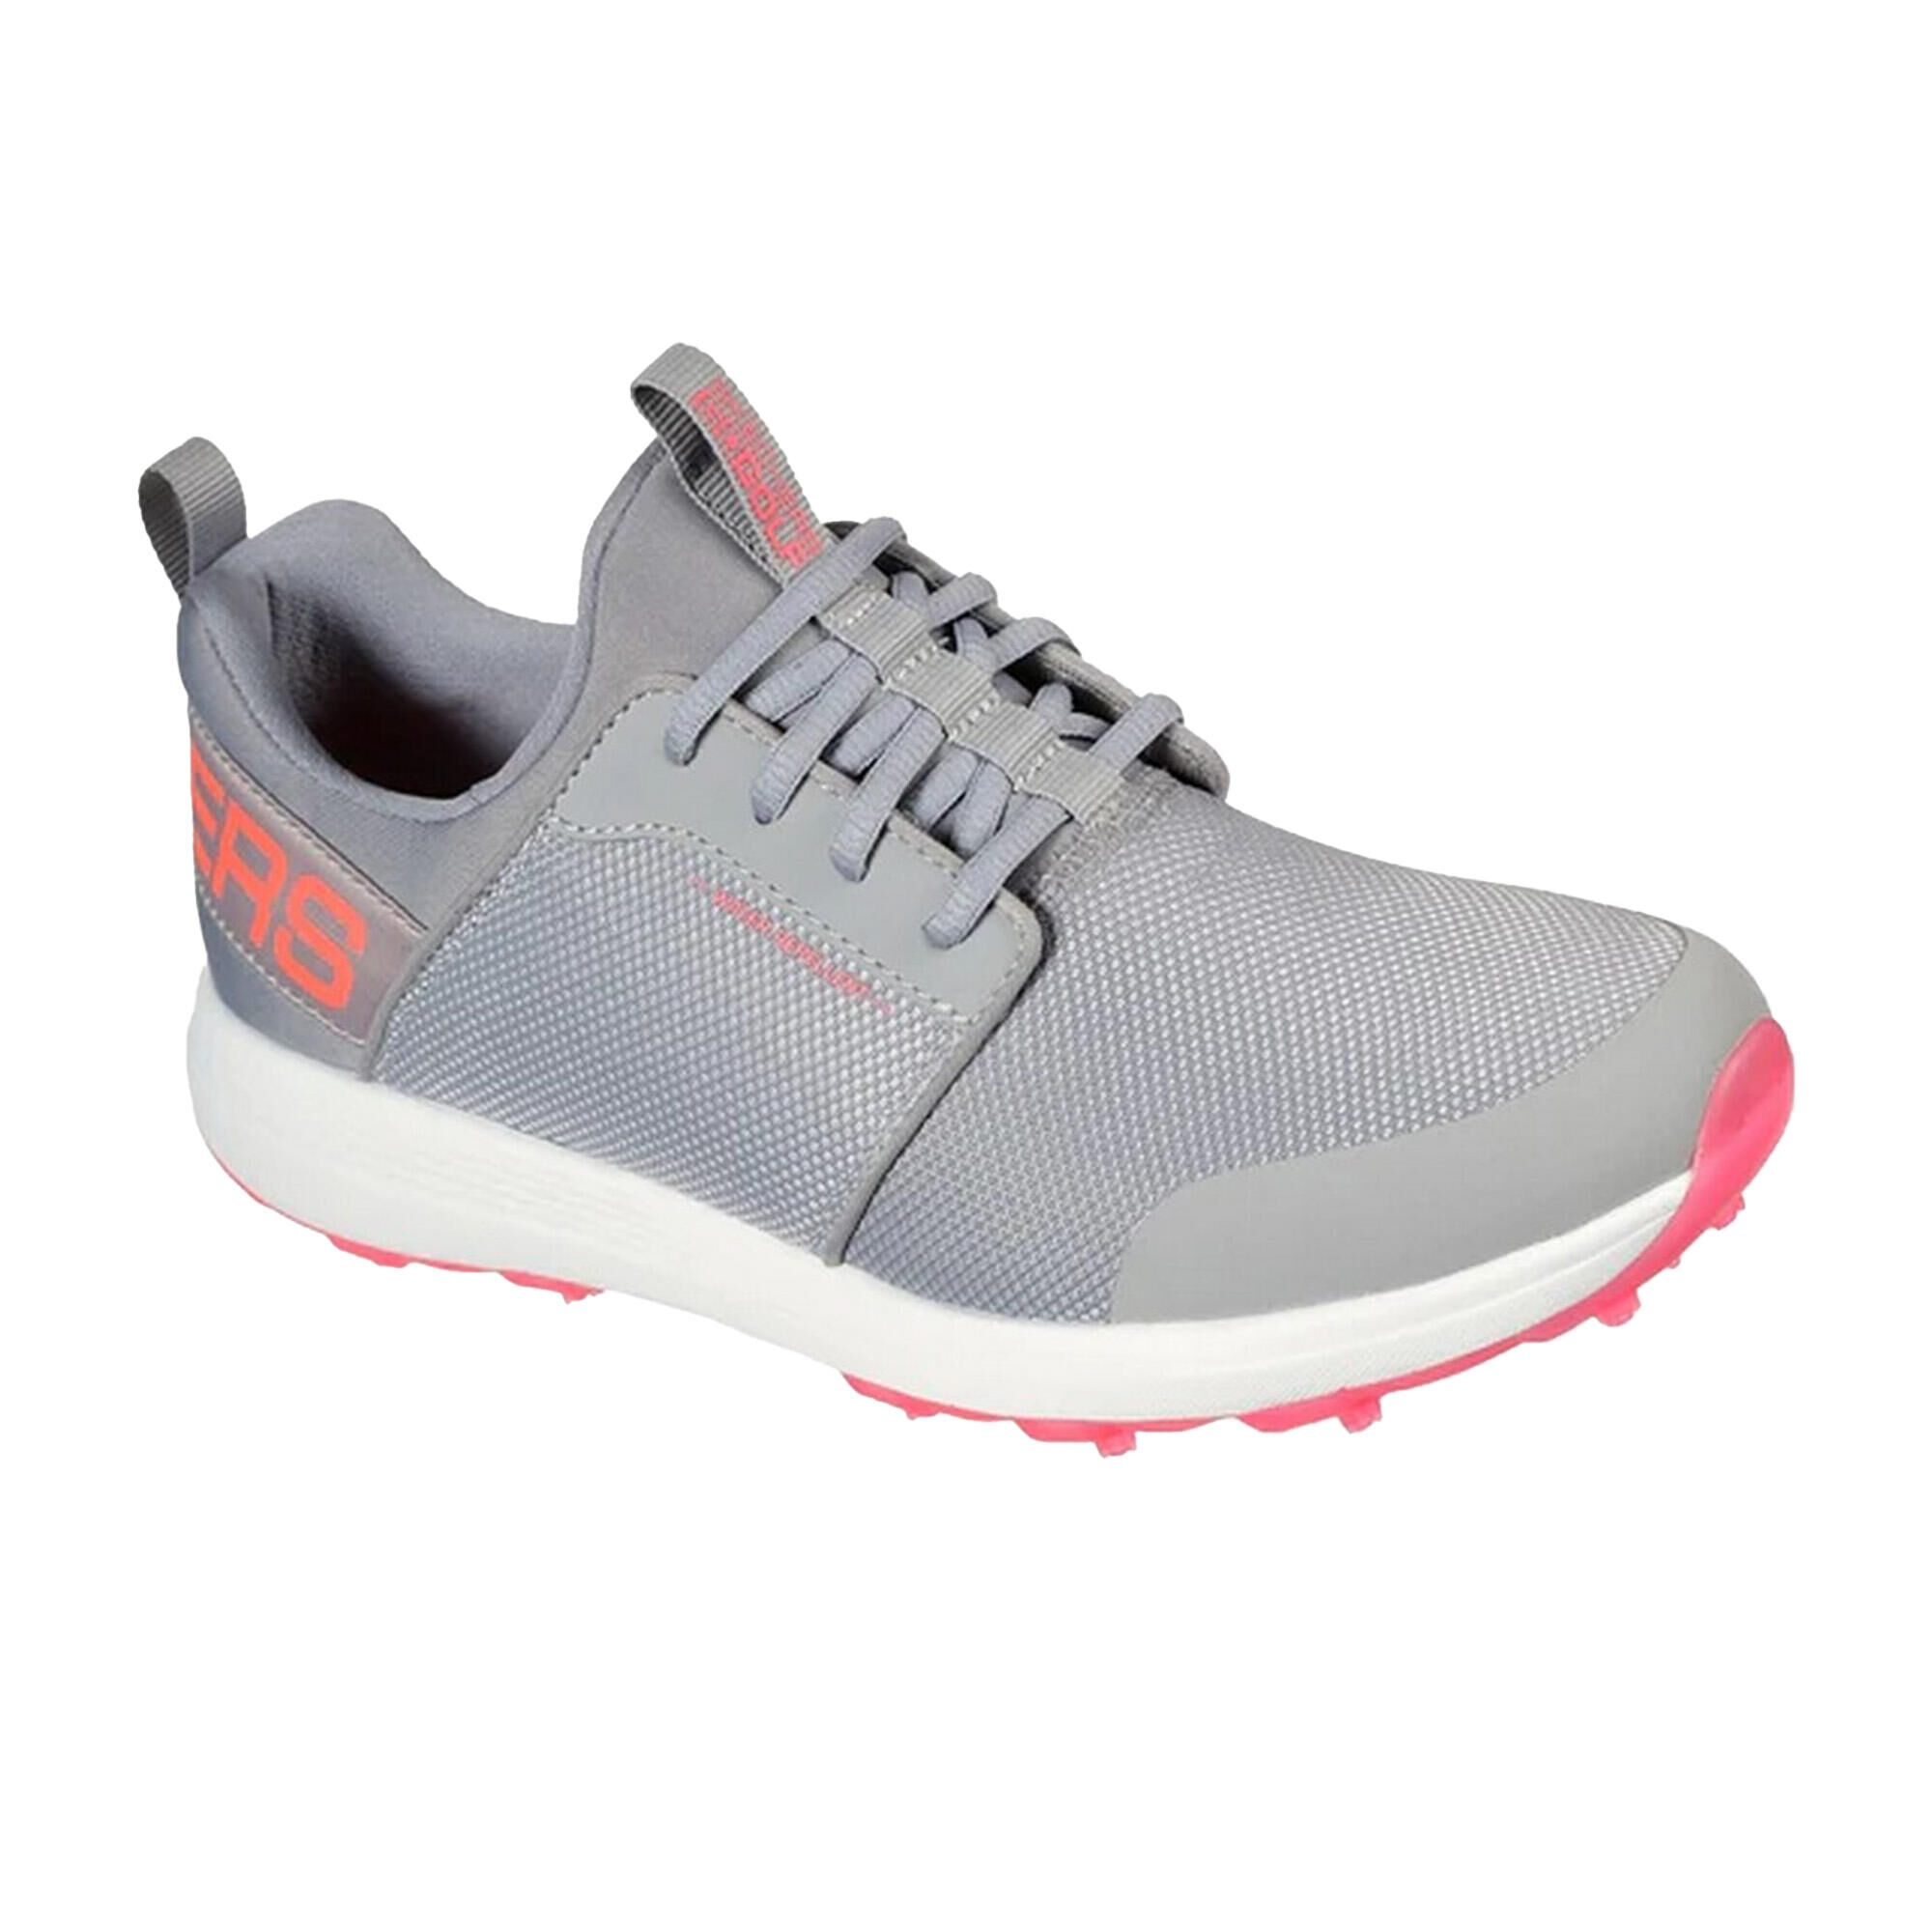 SKECHERS Womens/Ladies Go Golf Max Sport Trainers (Grey/Coral)